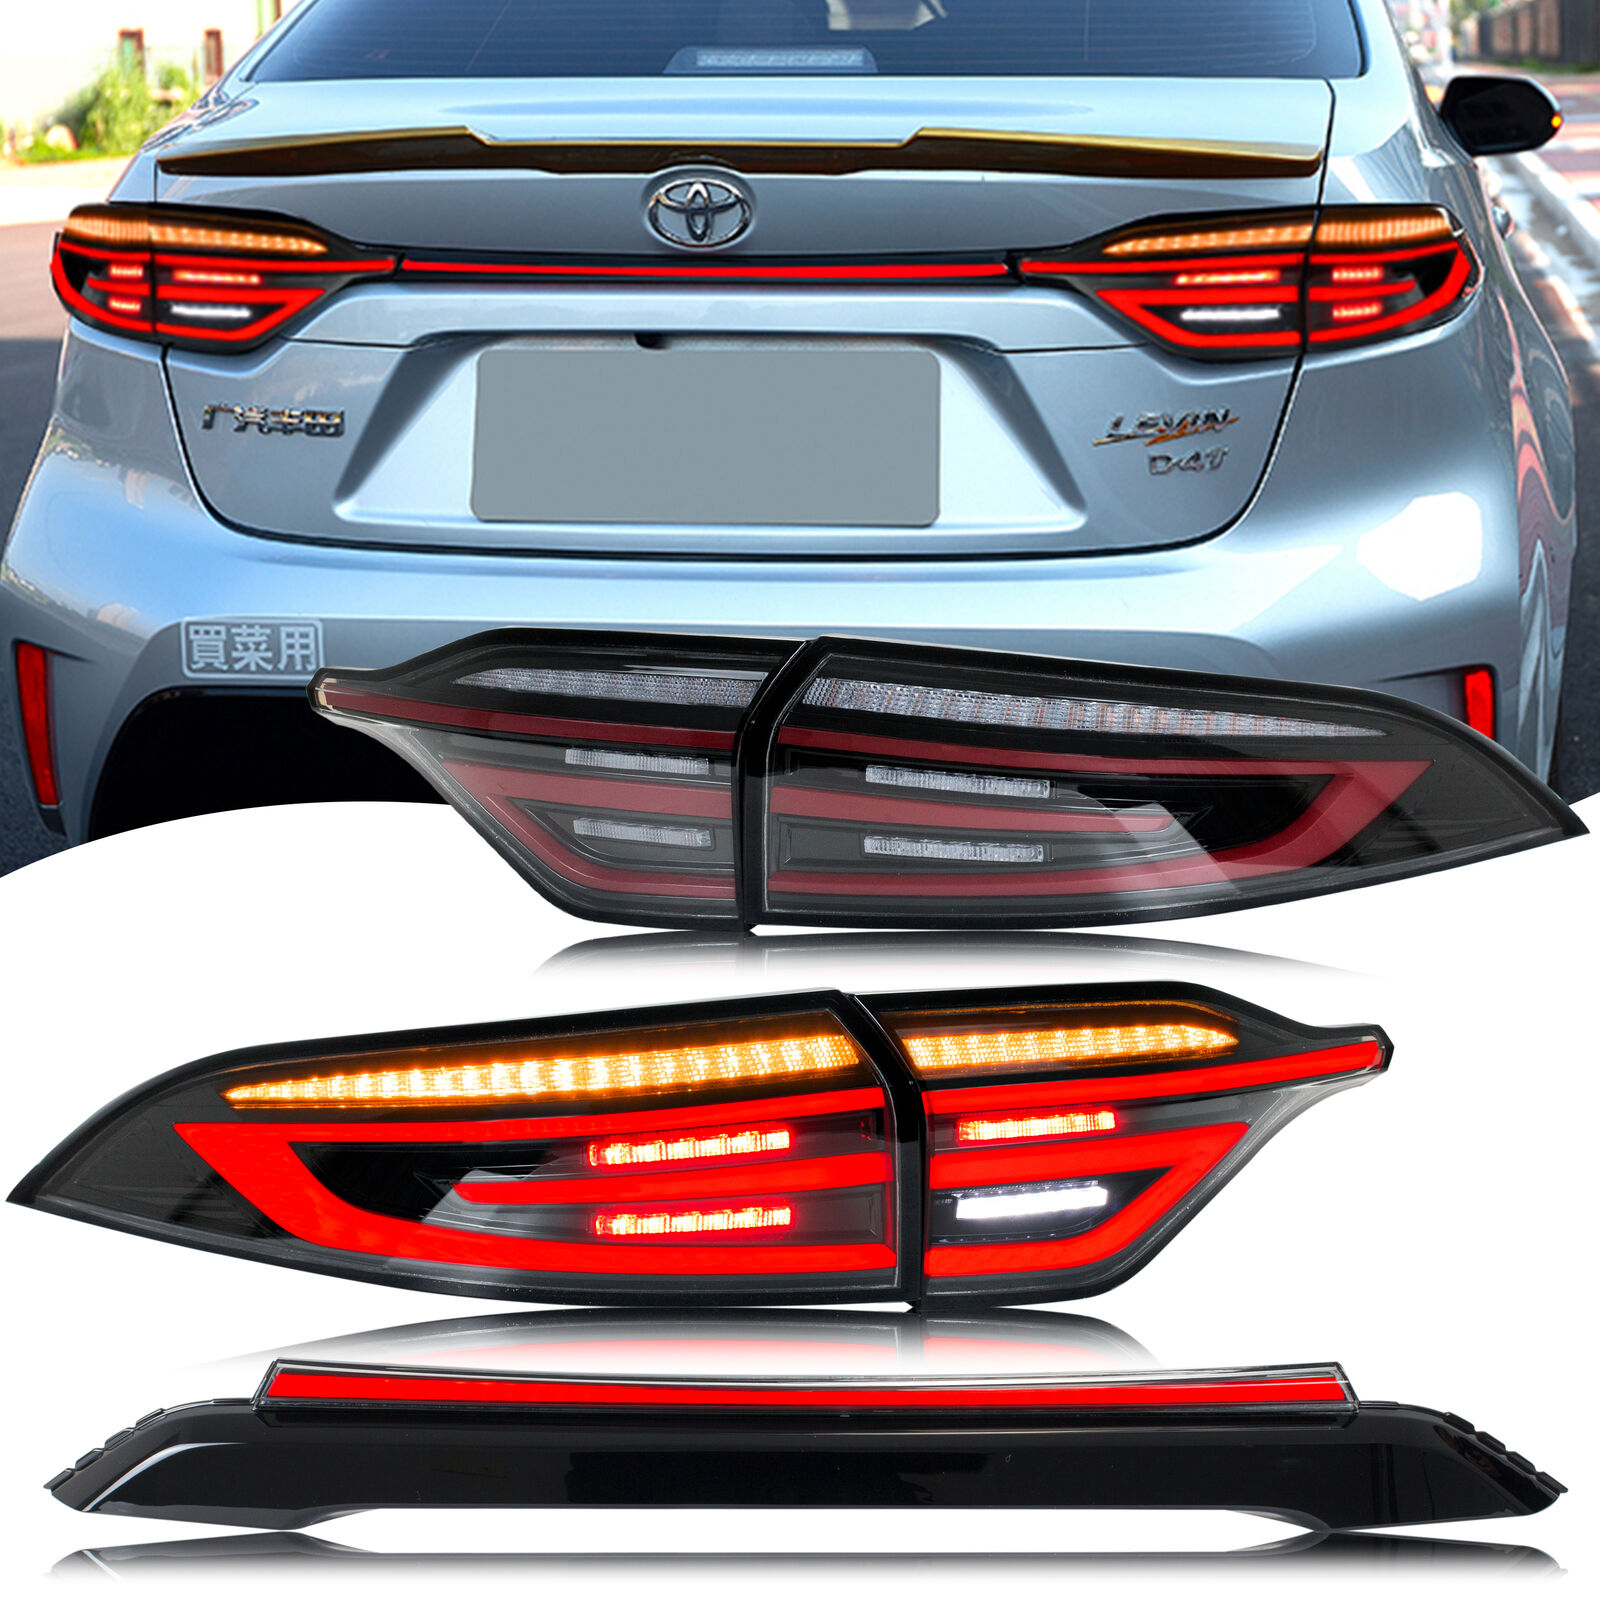 LED Tail Lights & Center Lamp for Toyota Corolla E210 2020-2024 Clear Rear Lamps